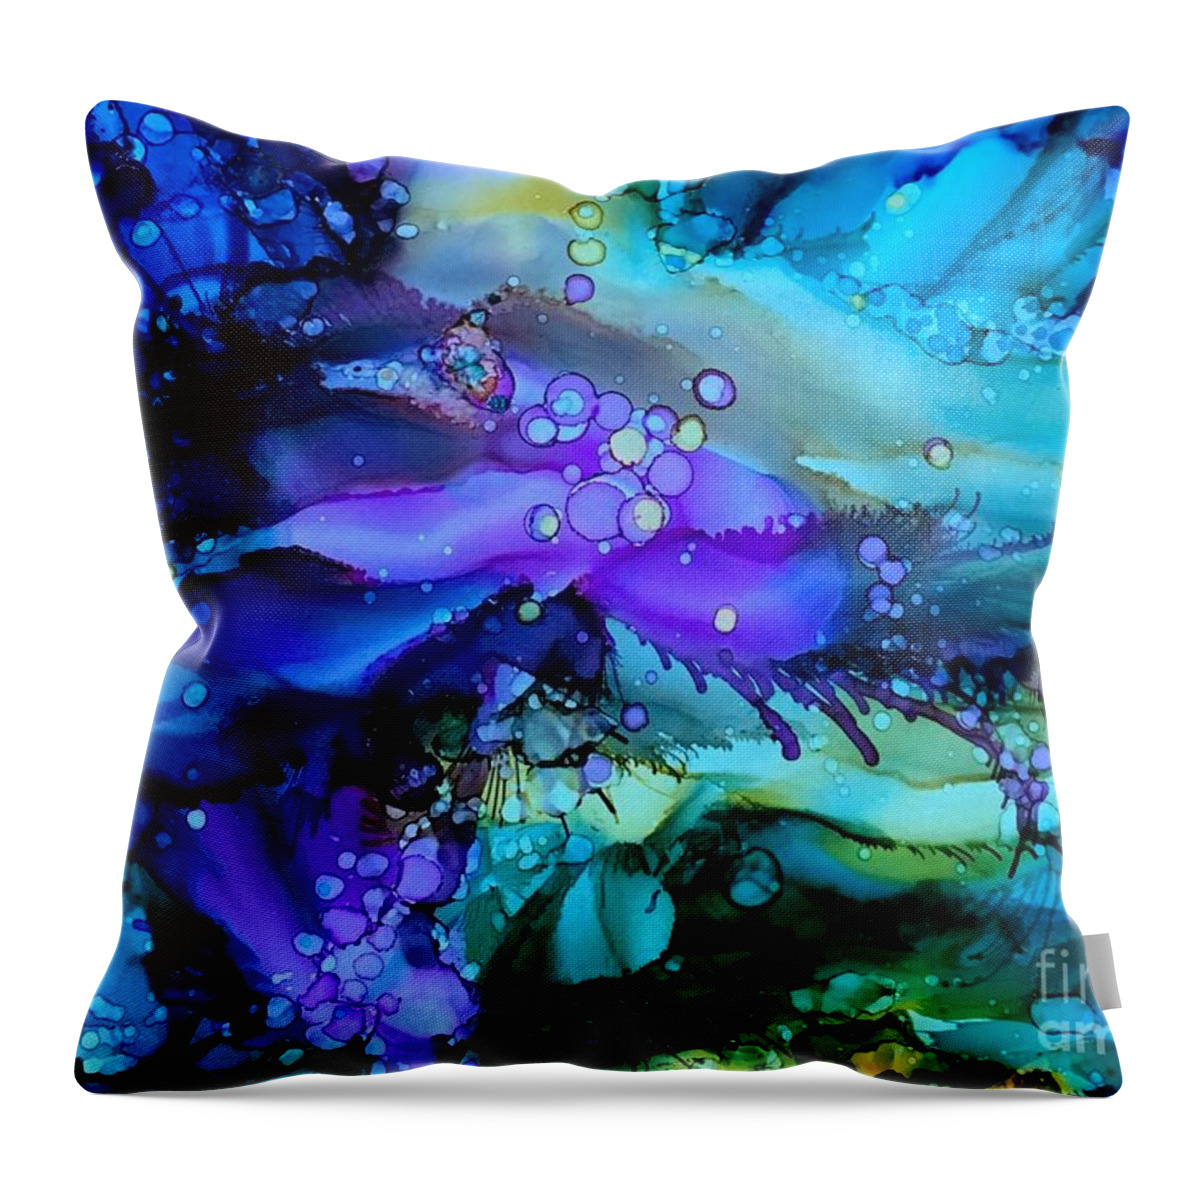 Blue Abstract Throw Pillow featuring the painting Blue Hue by Nancy Koehler